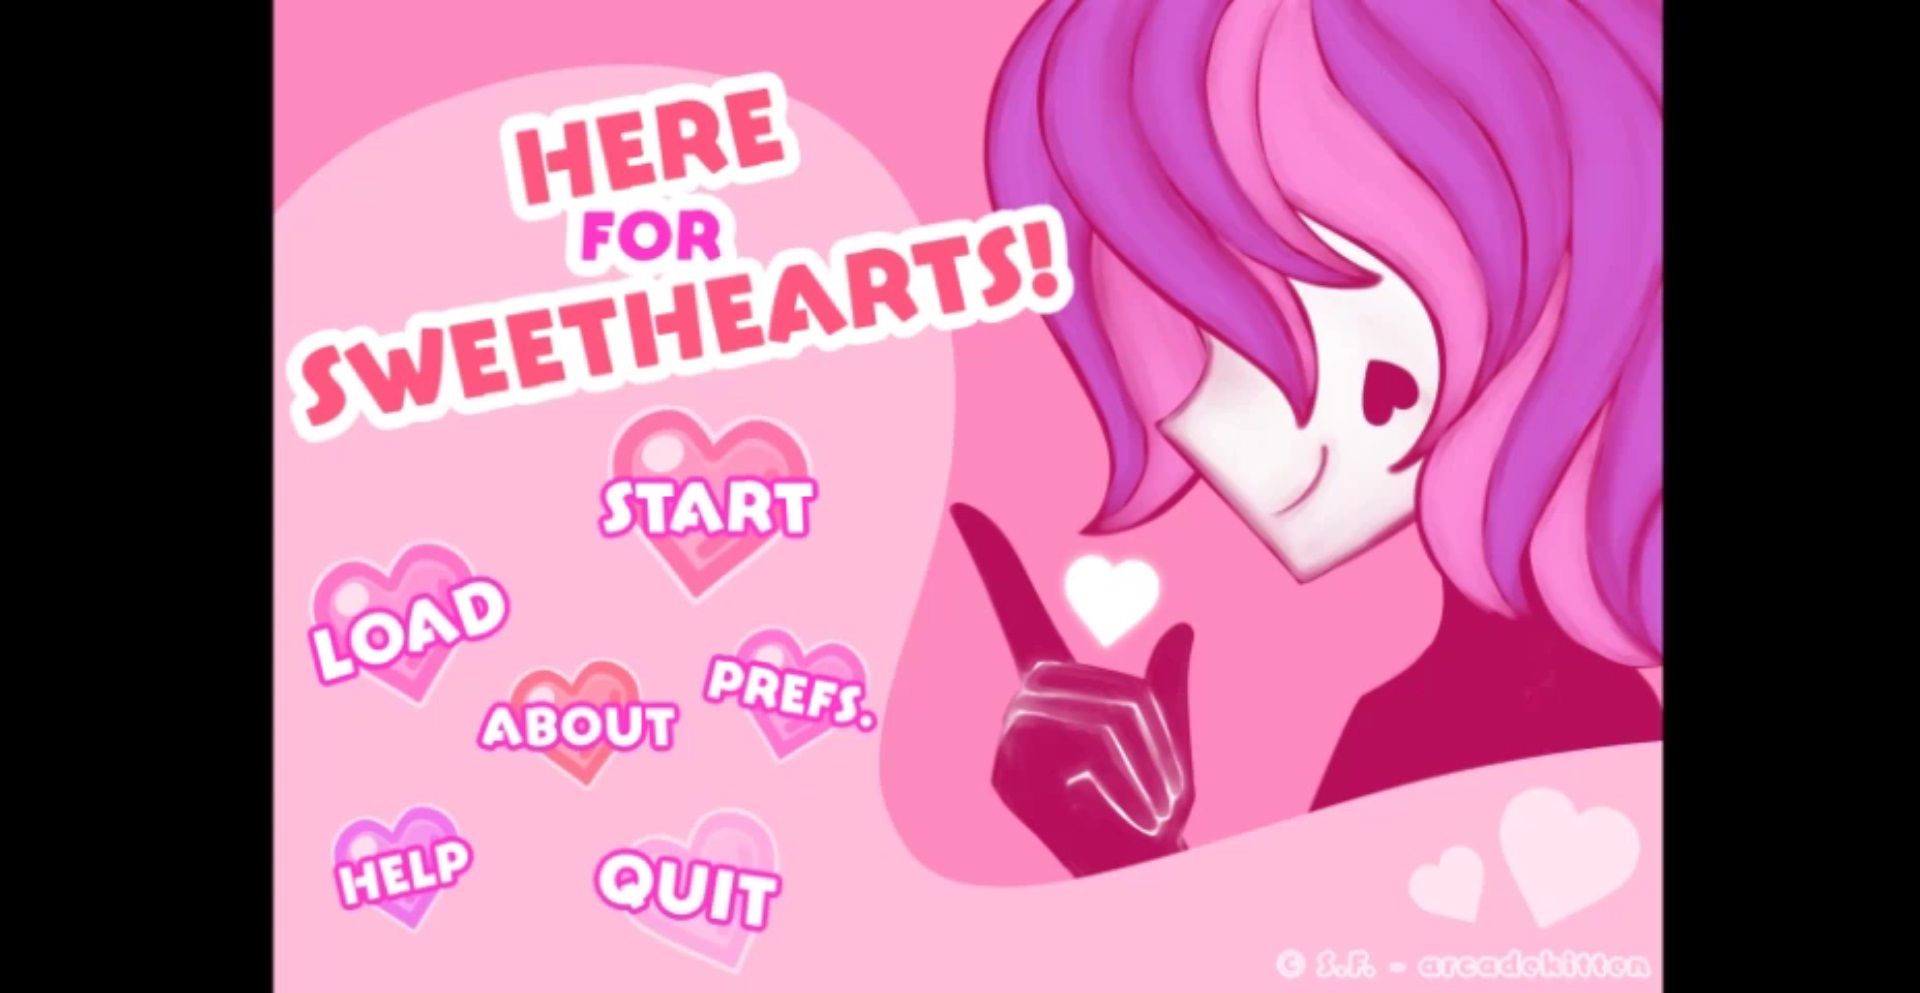 Here for sweethearts #2 (Netina)